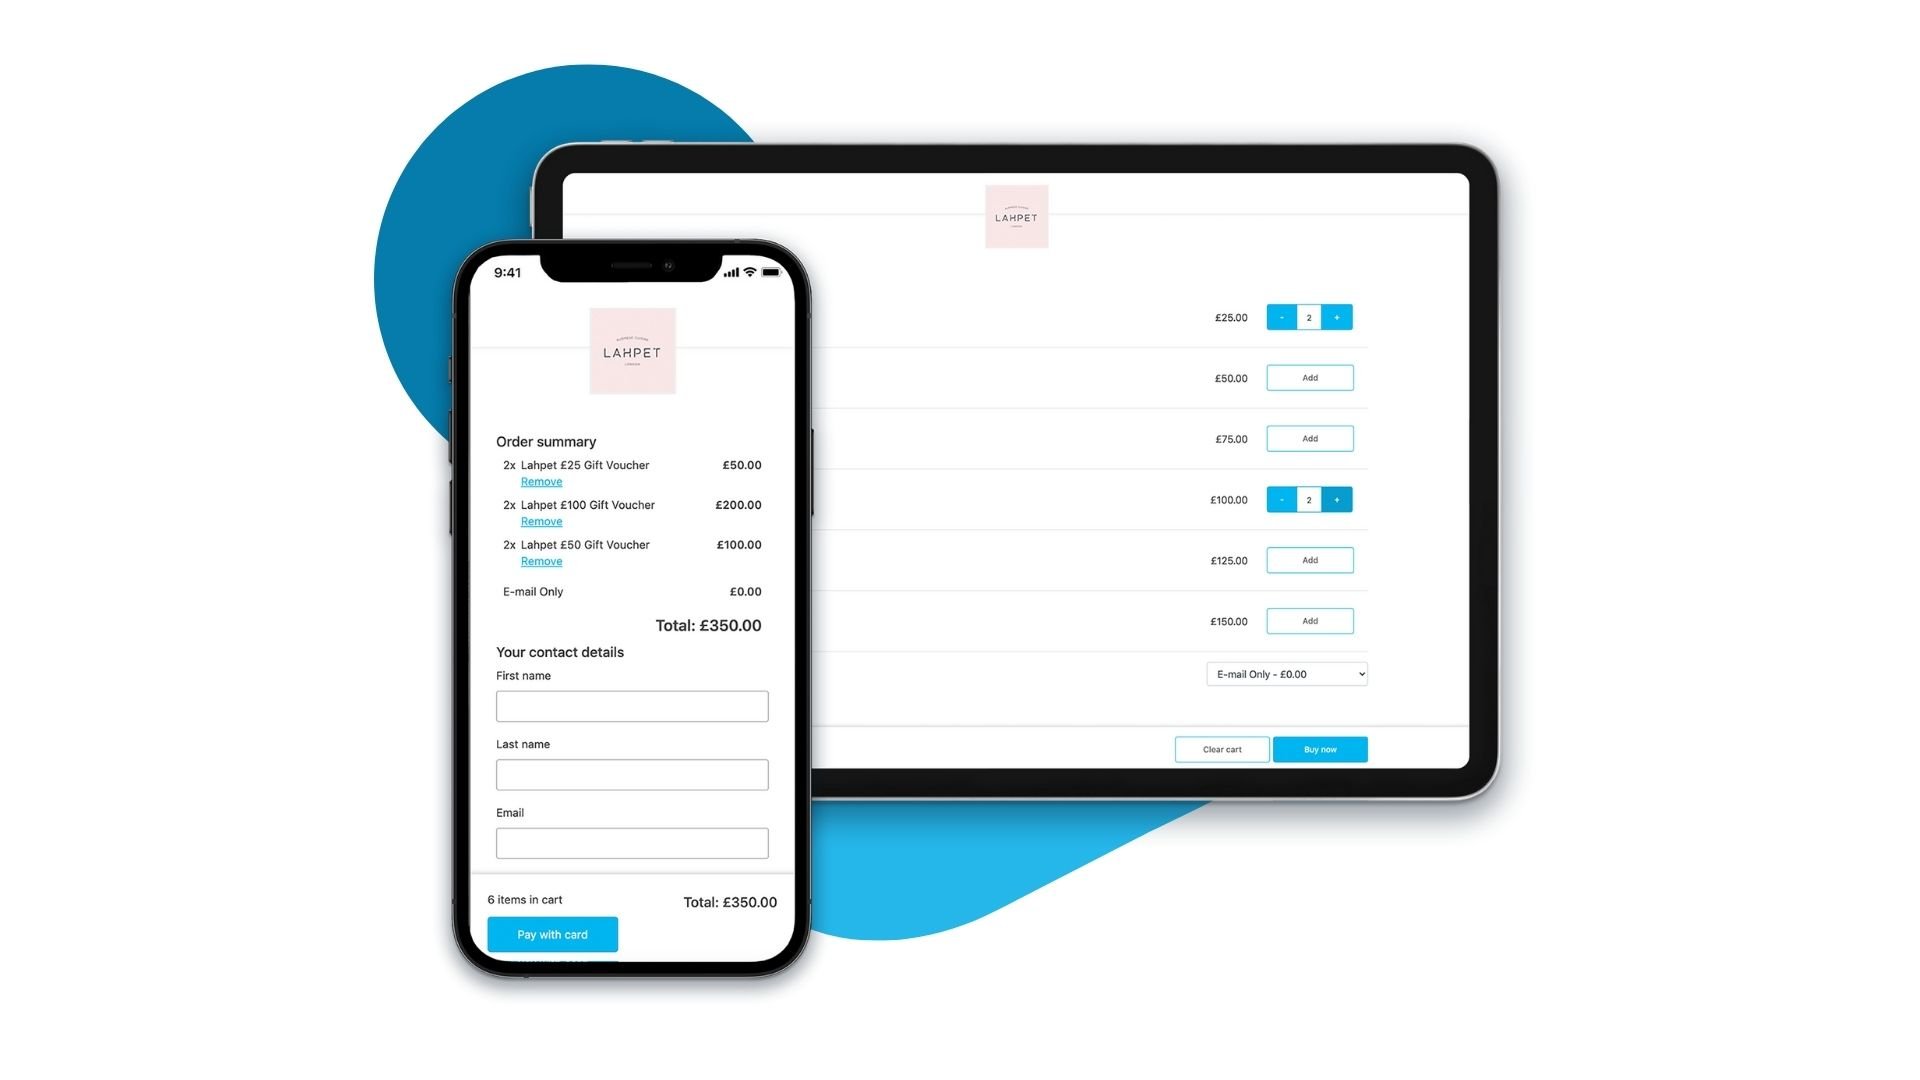 ResDiary pre-order management dashboard on smartphone and tablet